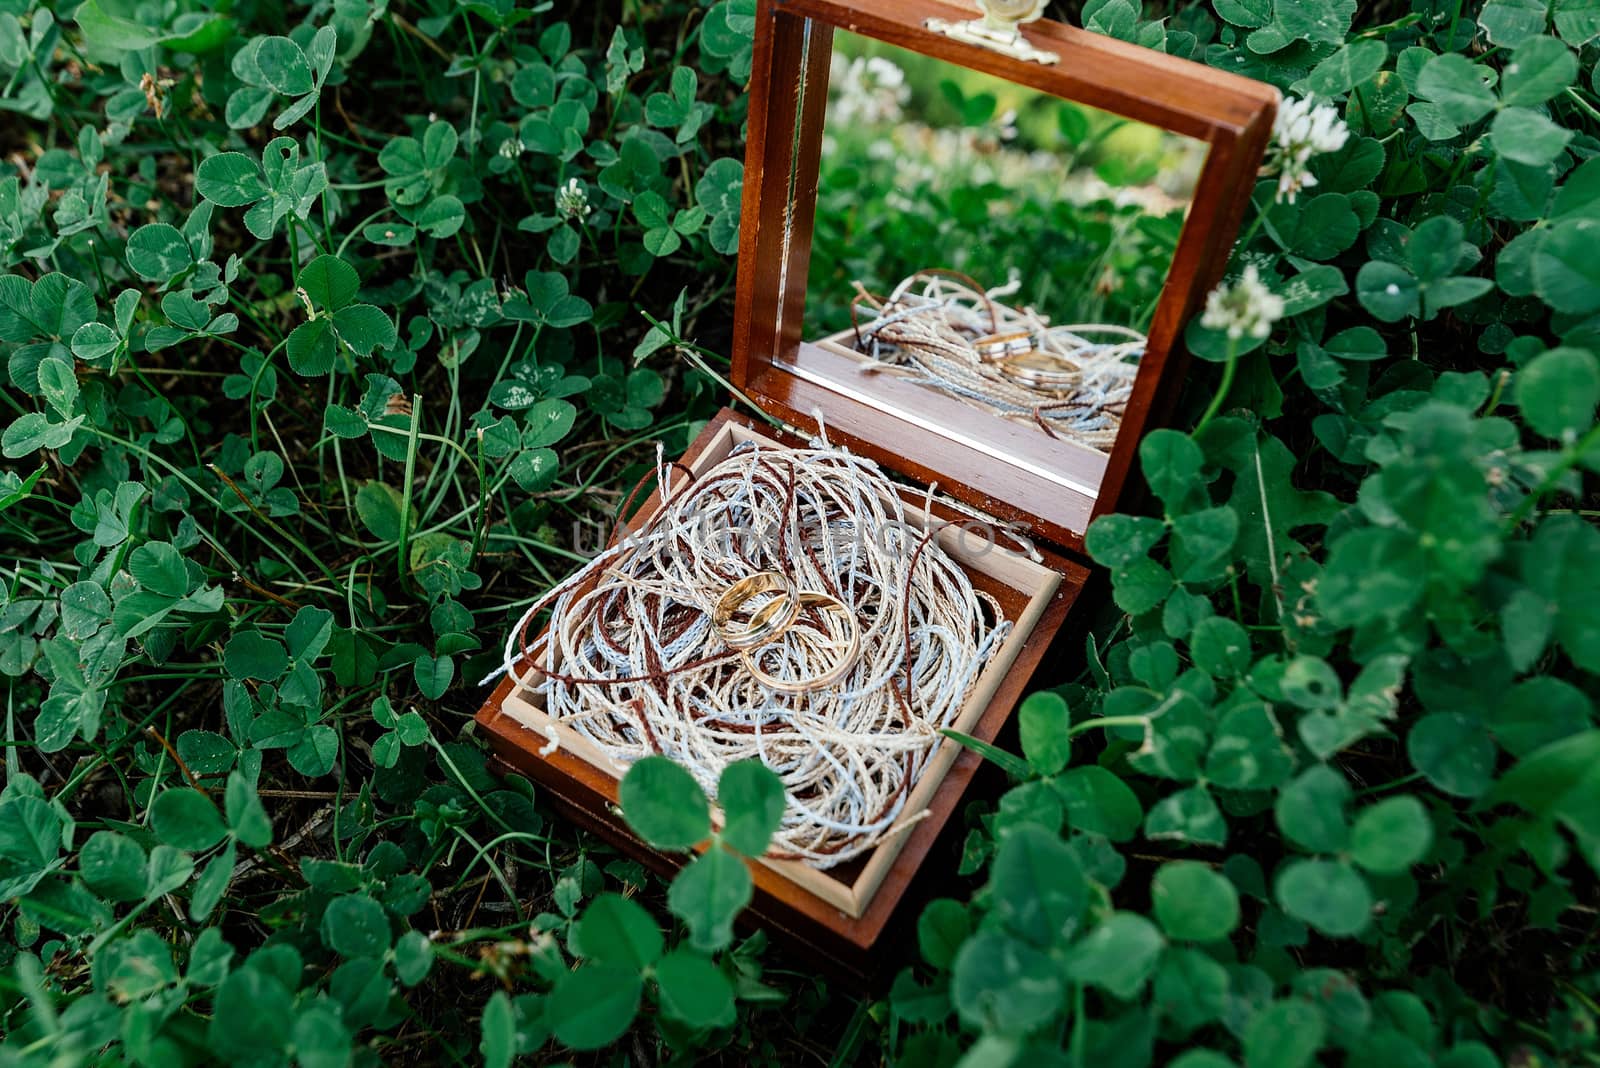 Golden wedding rings lie on the ropes in a wooden box with a mirror, which stands on the grass